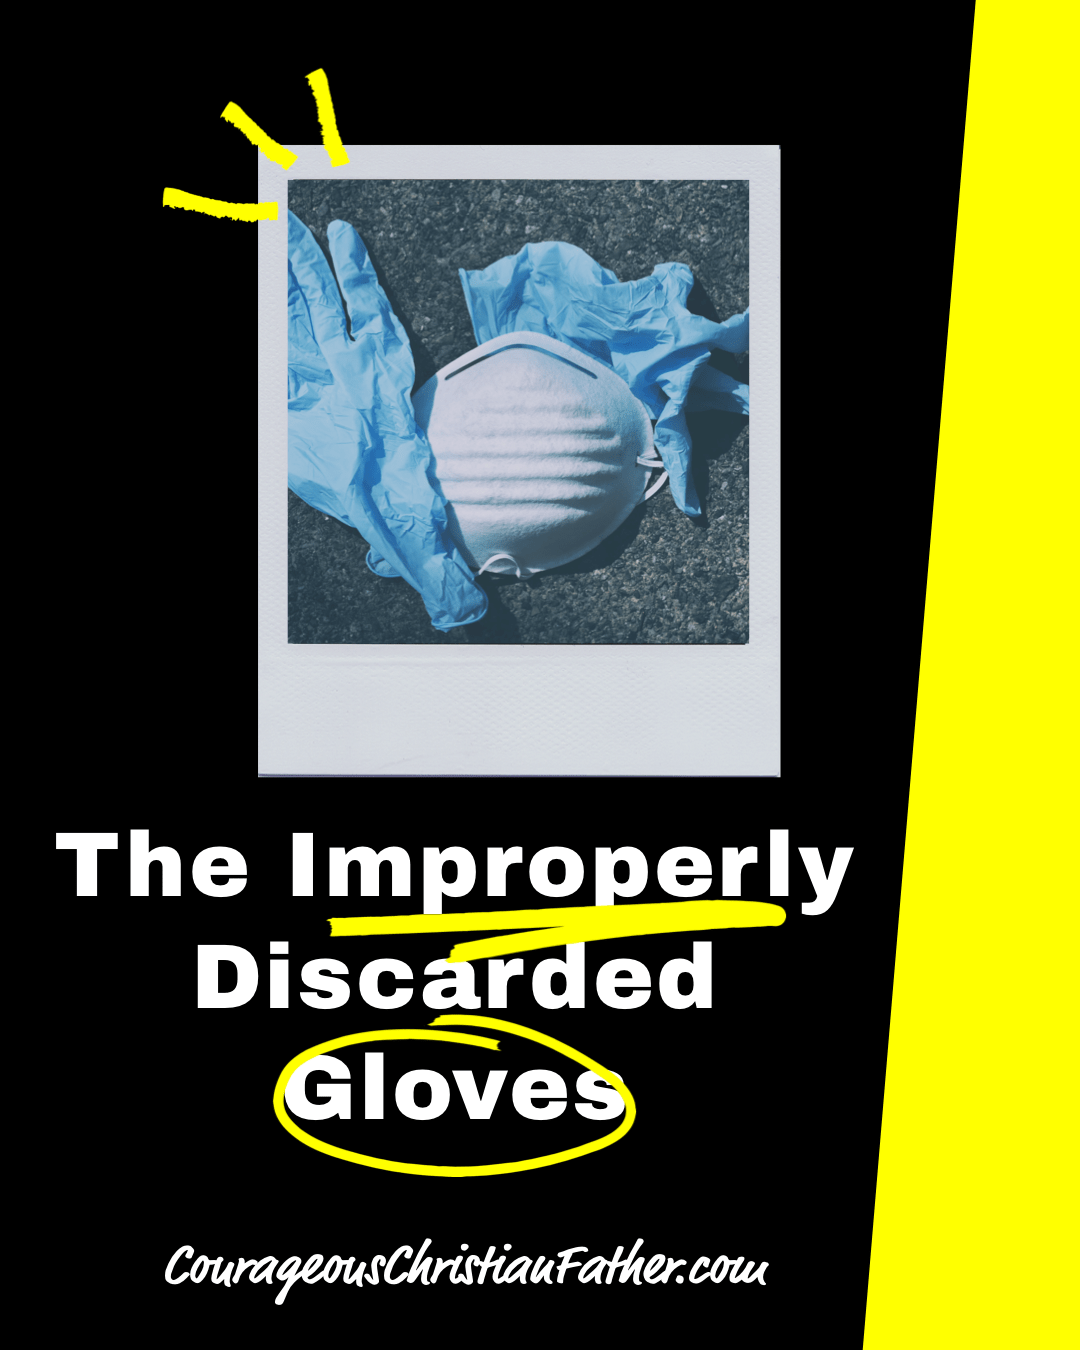 The Improperly Discarded Gloves, Face Mask - During this COVID-19 Coronavirus pandemic, people are wearing gloves and face masks and discarding them incorrectly.  #Gloves #FaceMask